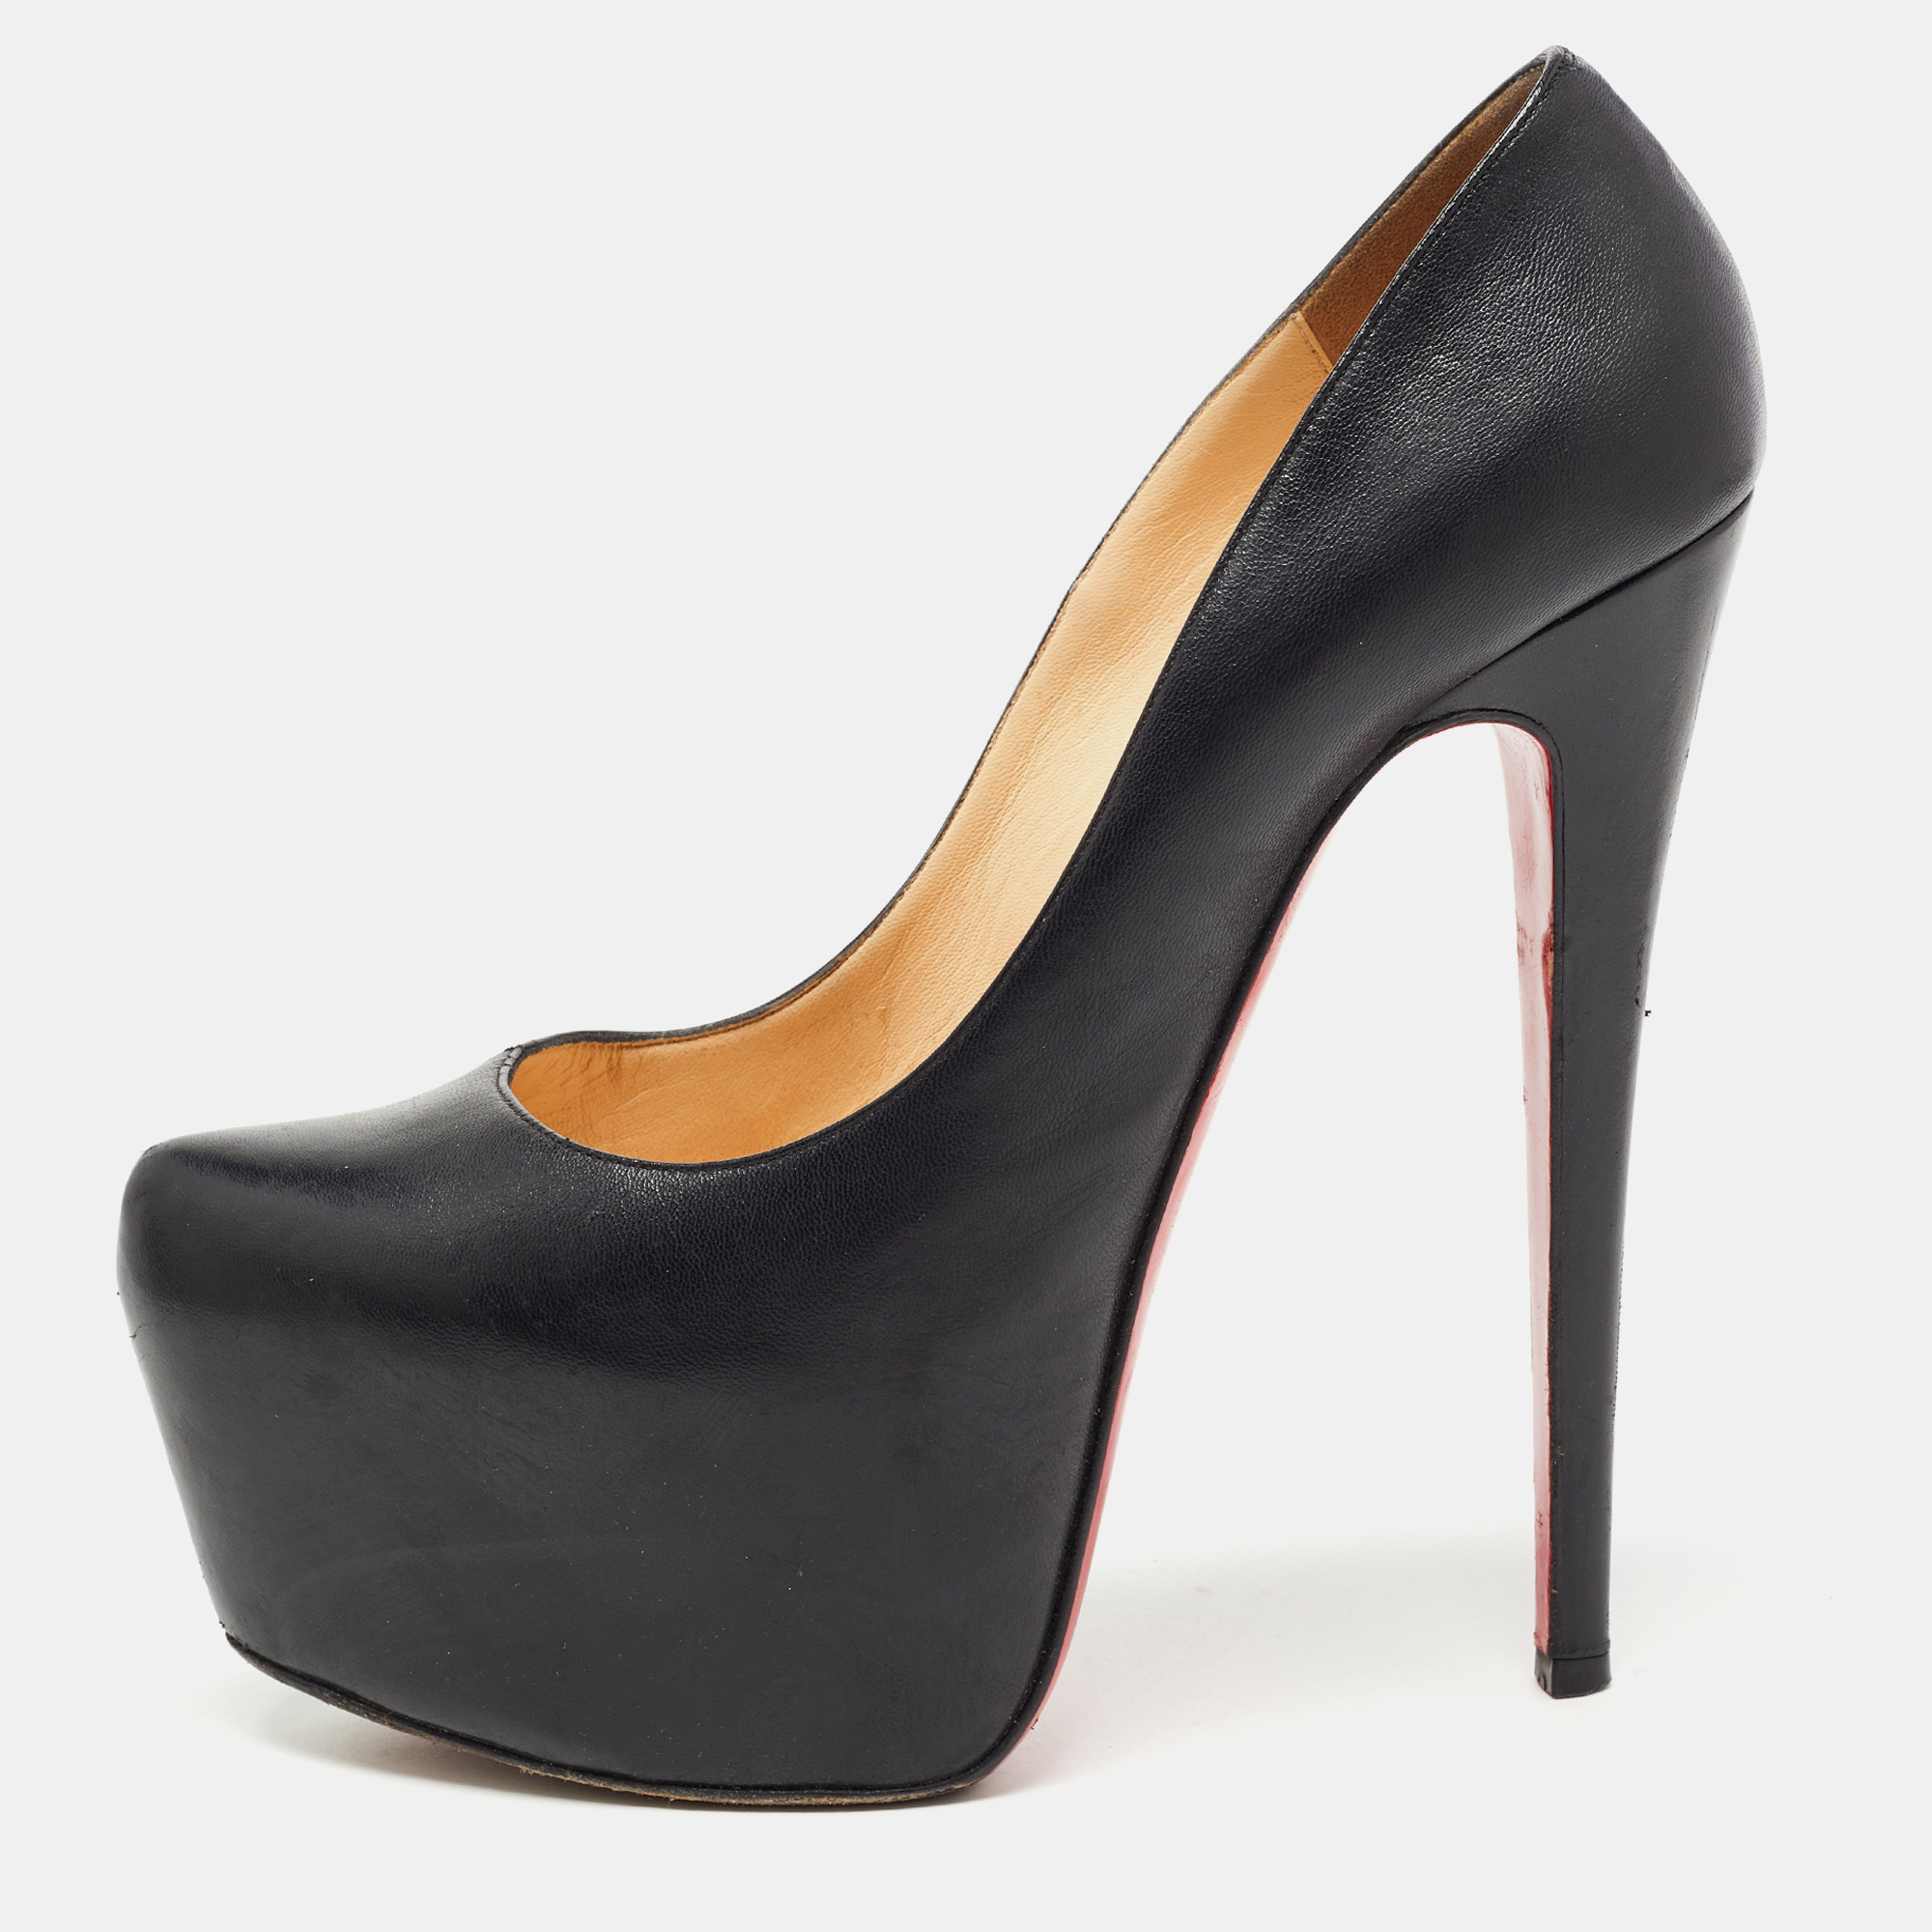 Pre-owned Christian Louboutin Black Leather Daffodile Pumps Size 38